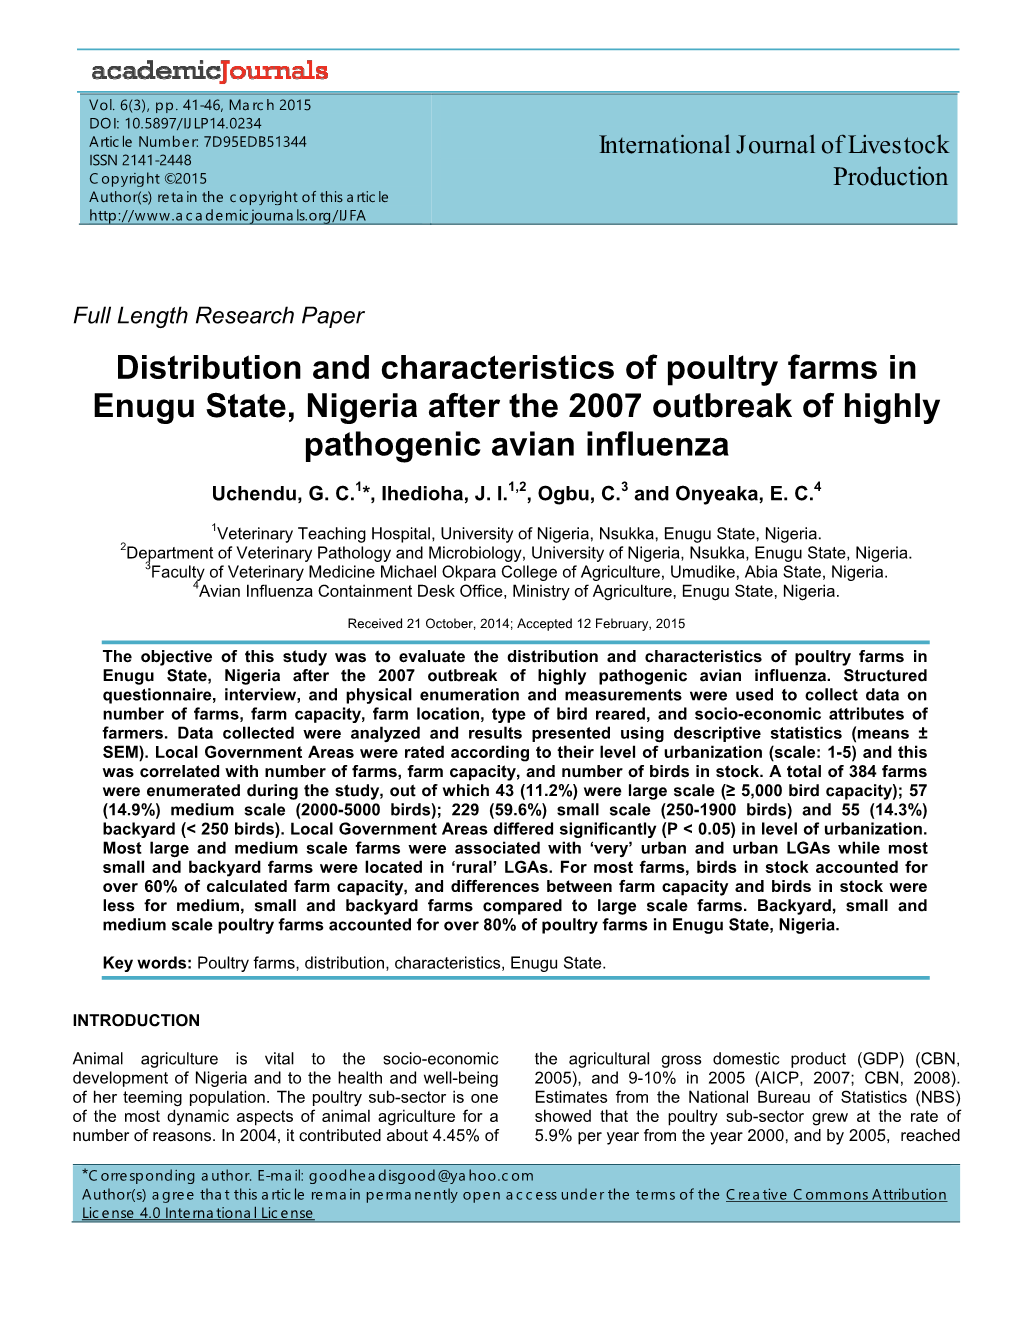 Distribution and Characteristics of Poultry Farms in Enugu State, Nigeria After the 2007 Outbreak of Highly Pathogenic Avian Influenza